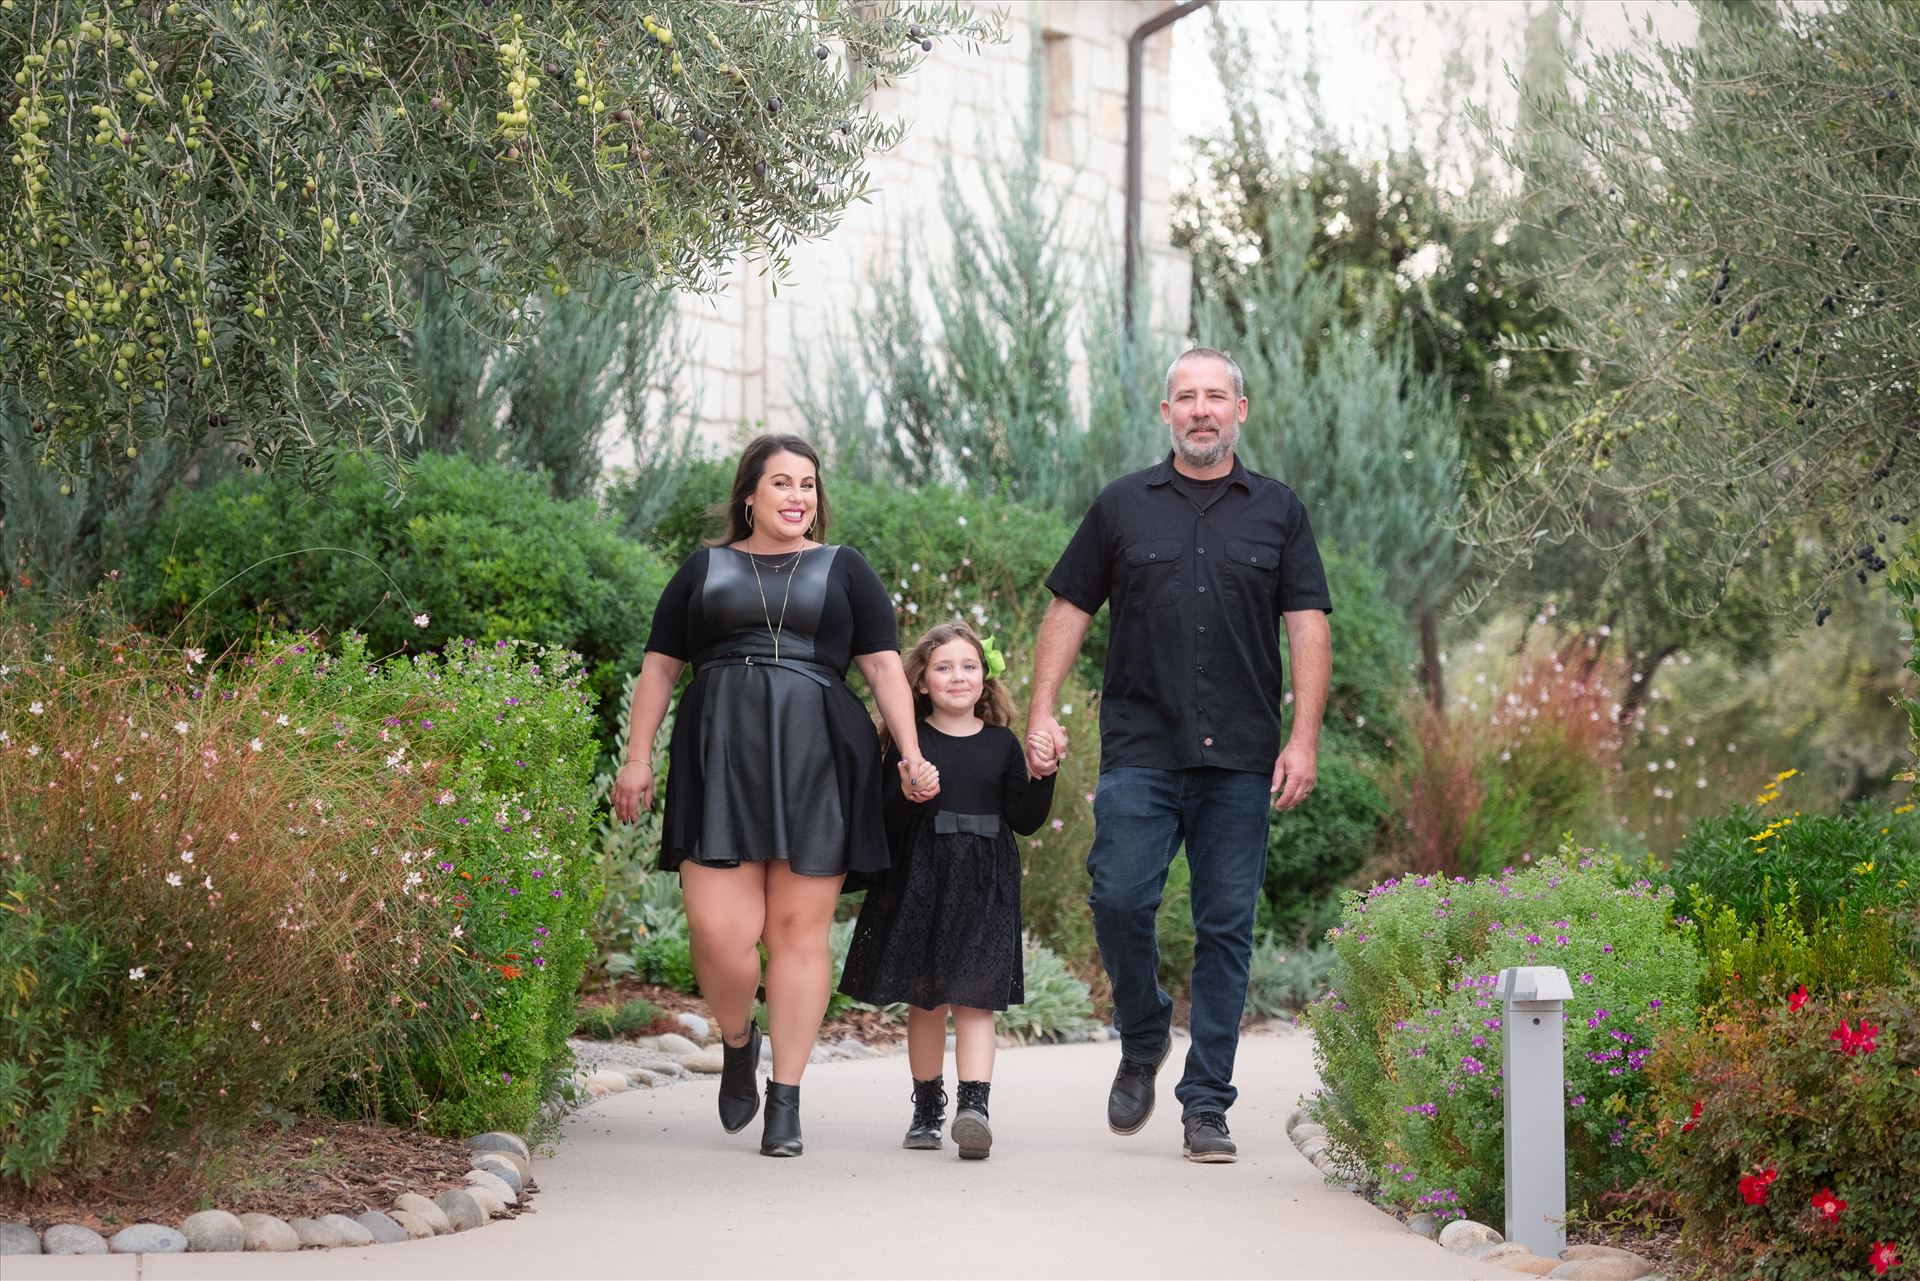 Final-8248.JPG - Sarah Williams of Mirror's Edge Photography, a San Luis Obispo Wedding, Engagement and Portrait Photographer, captures the Foster Family Fall Session at the gorgeous Allegretto Resort and Vineyards in Paso Robles, California. Walk the paths by Sarah Williams